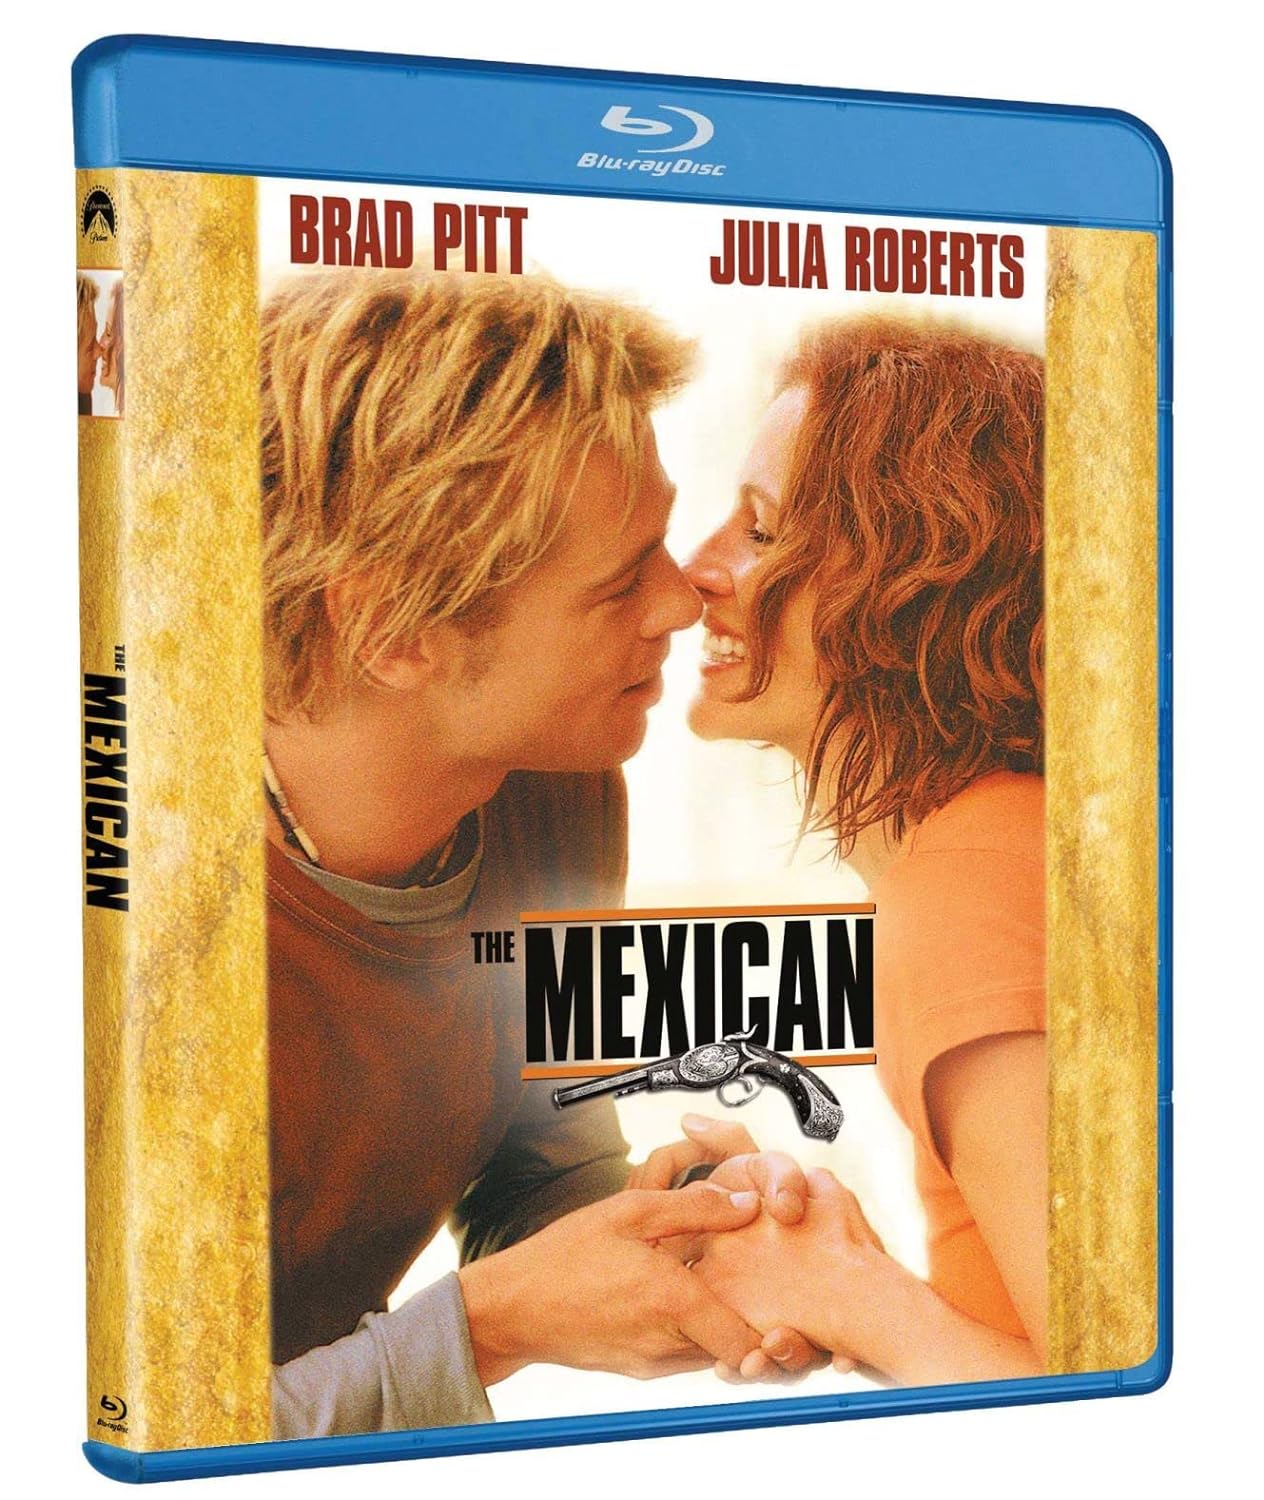 The Mexican (2001) 3297Kbps 23.976Fps 48Khz BluRay DTS-HD MA 5.1Ch Turkish Audio TAC